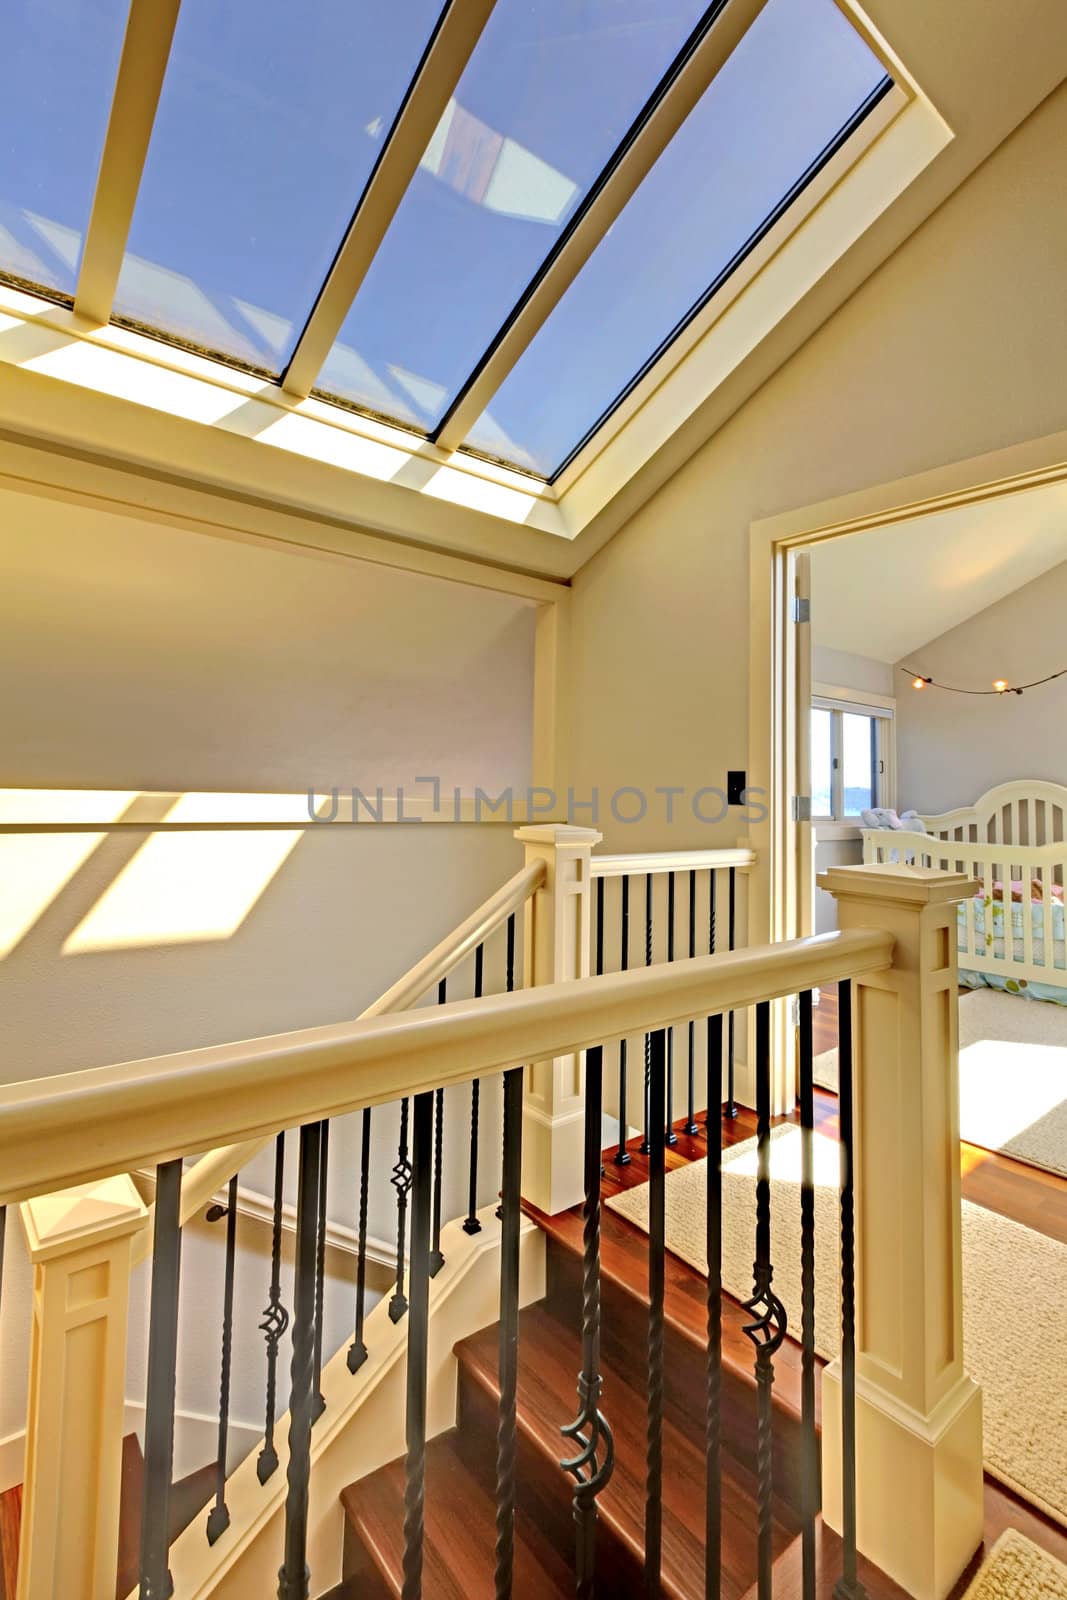 Staircase with skylight and baby room in a bright hallway.